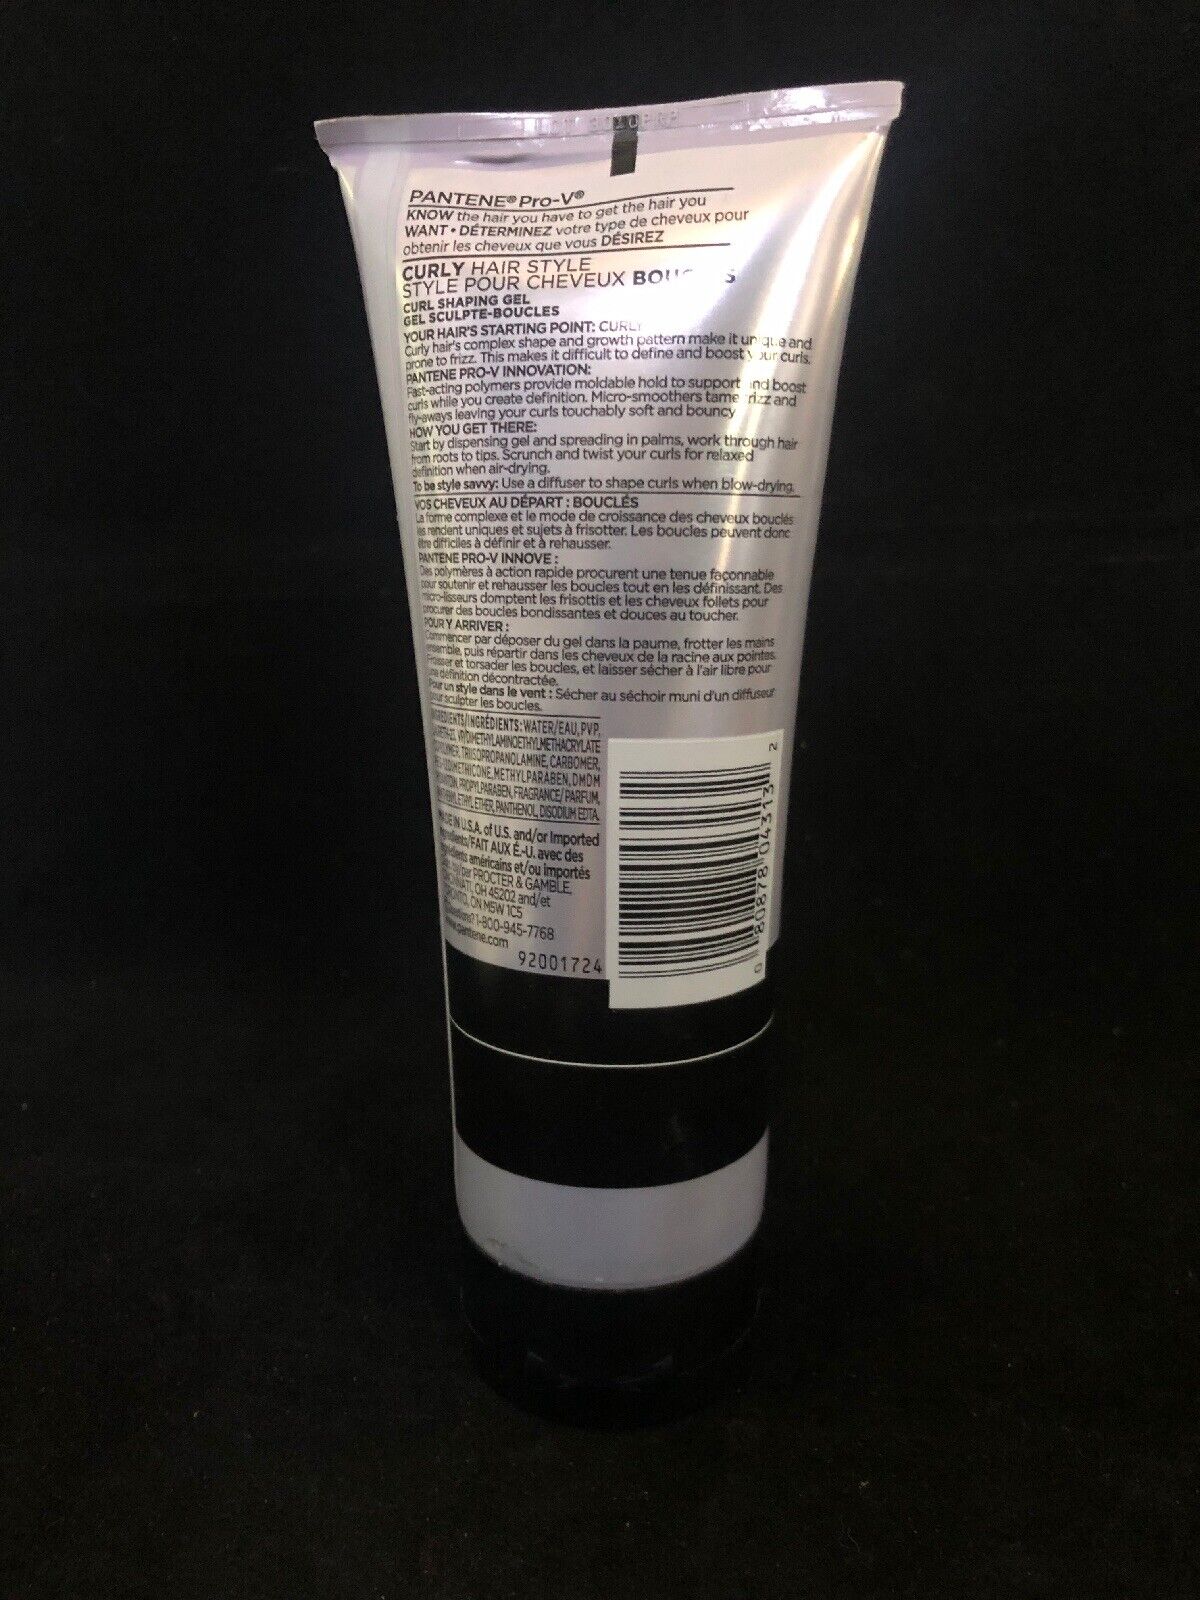 Pantene Pro-V - Gel curly Hair, curl shaping, extra strong hold  oz |  eBay